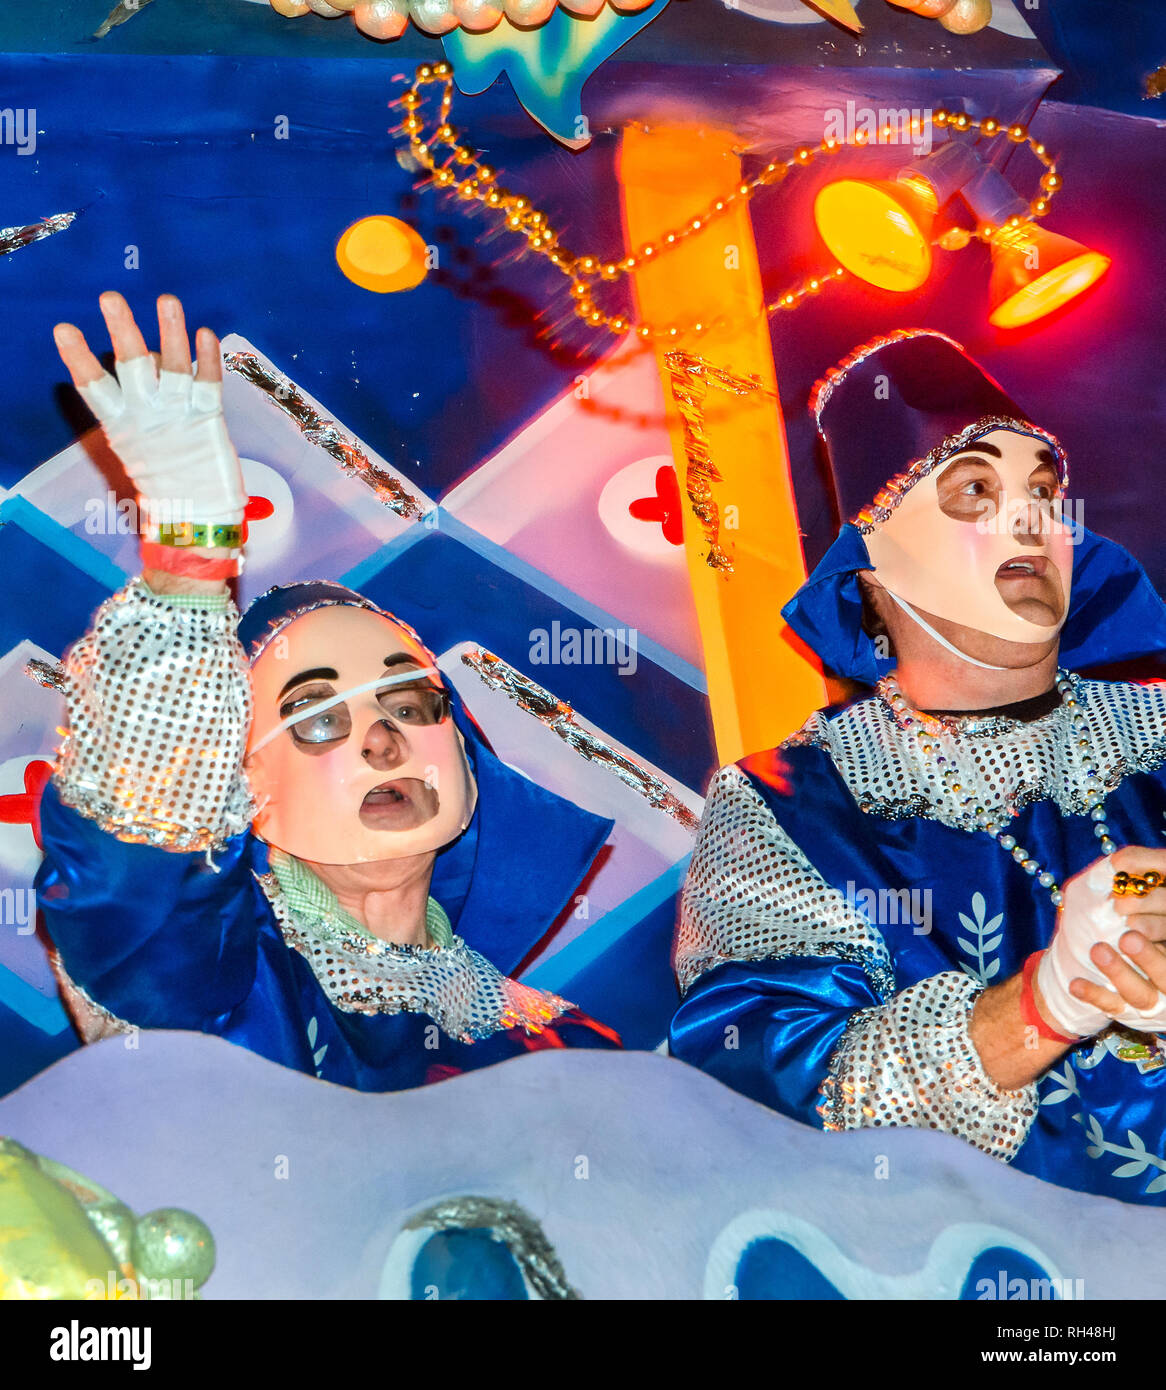 Members of the Krewe of Hermes throw beads during a Mardi Gras parade, Feb. 28, 2014, in New Orleans, Louisiana. Stock Photo